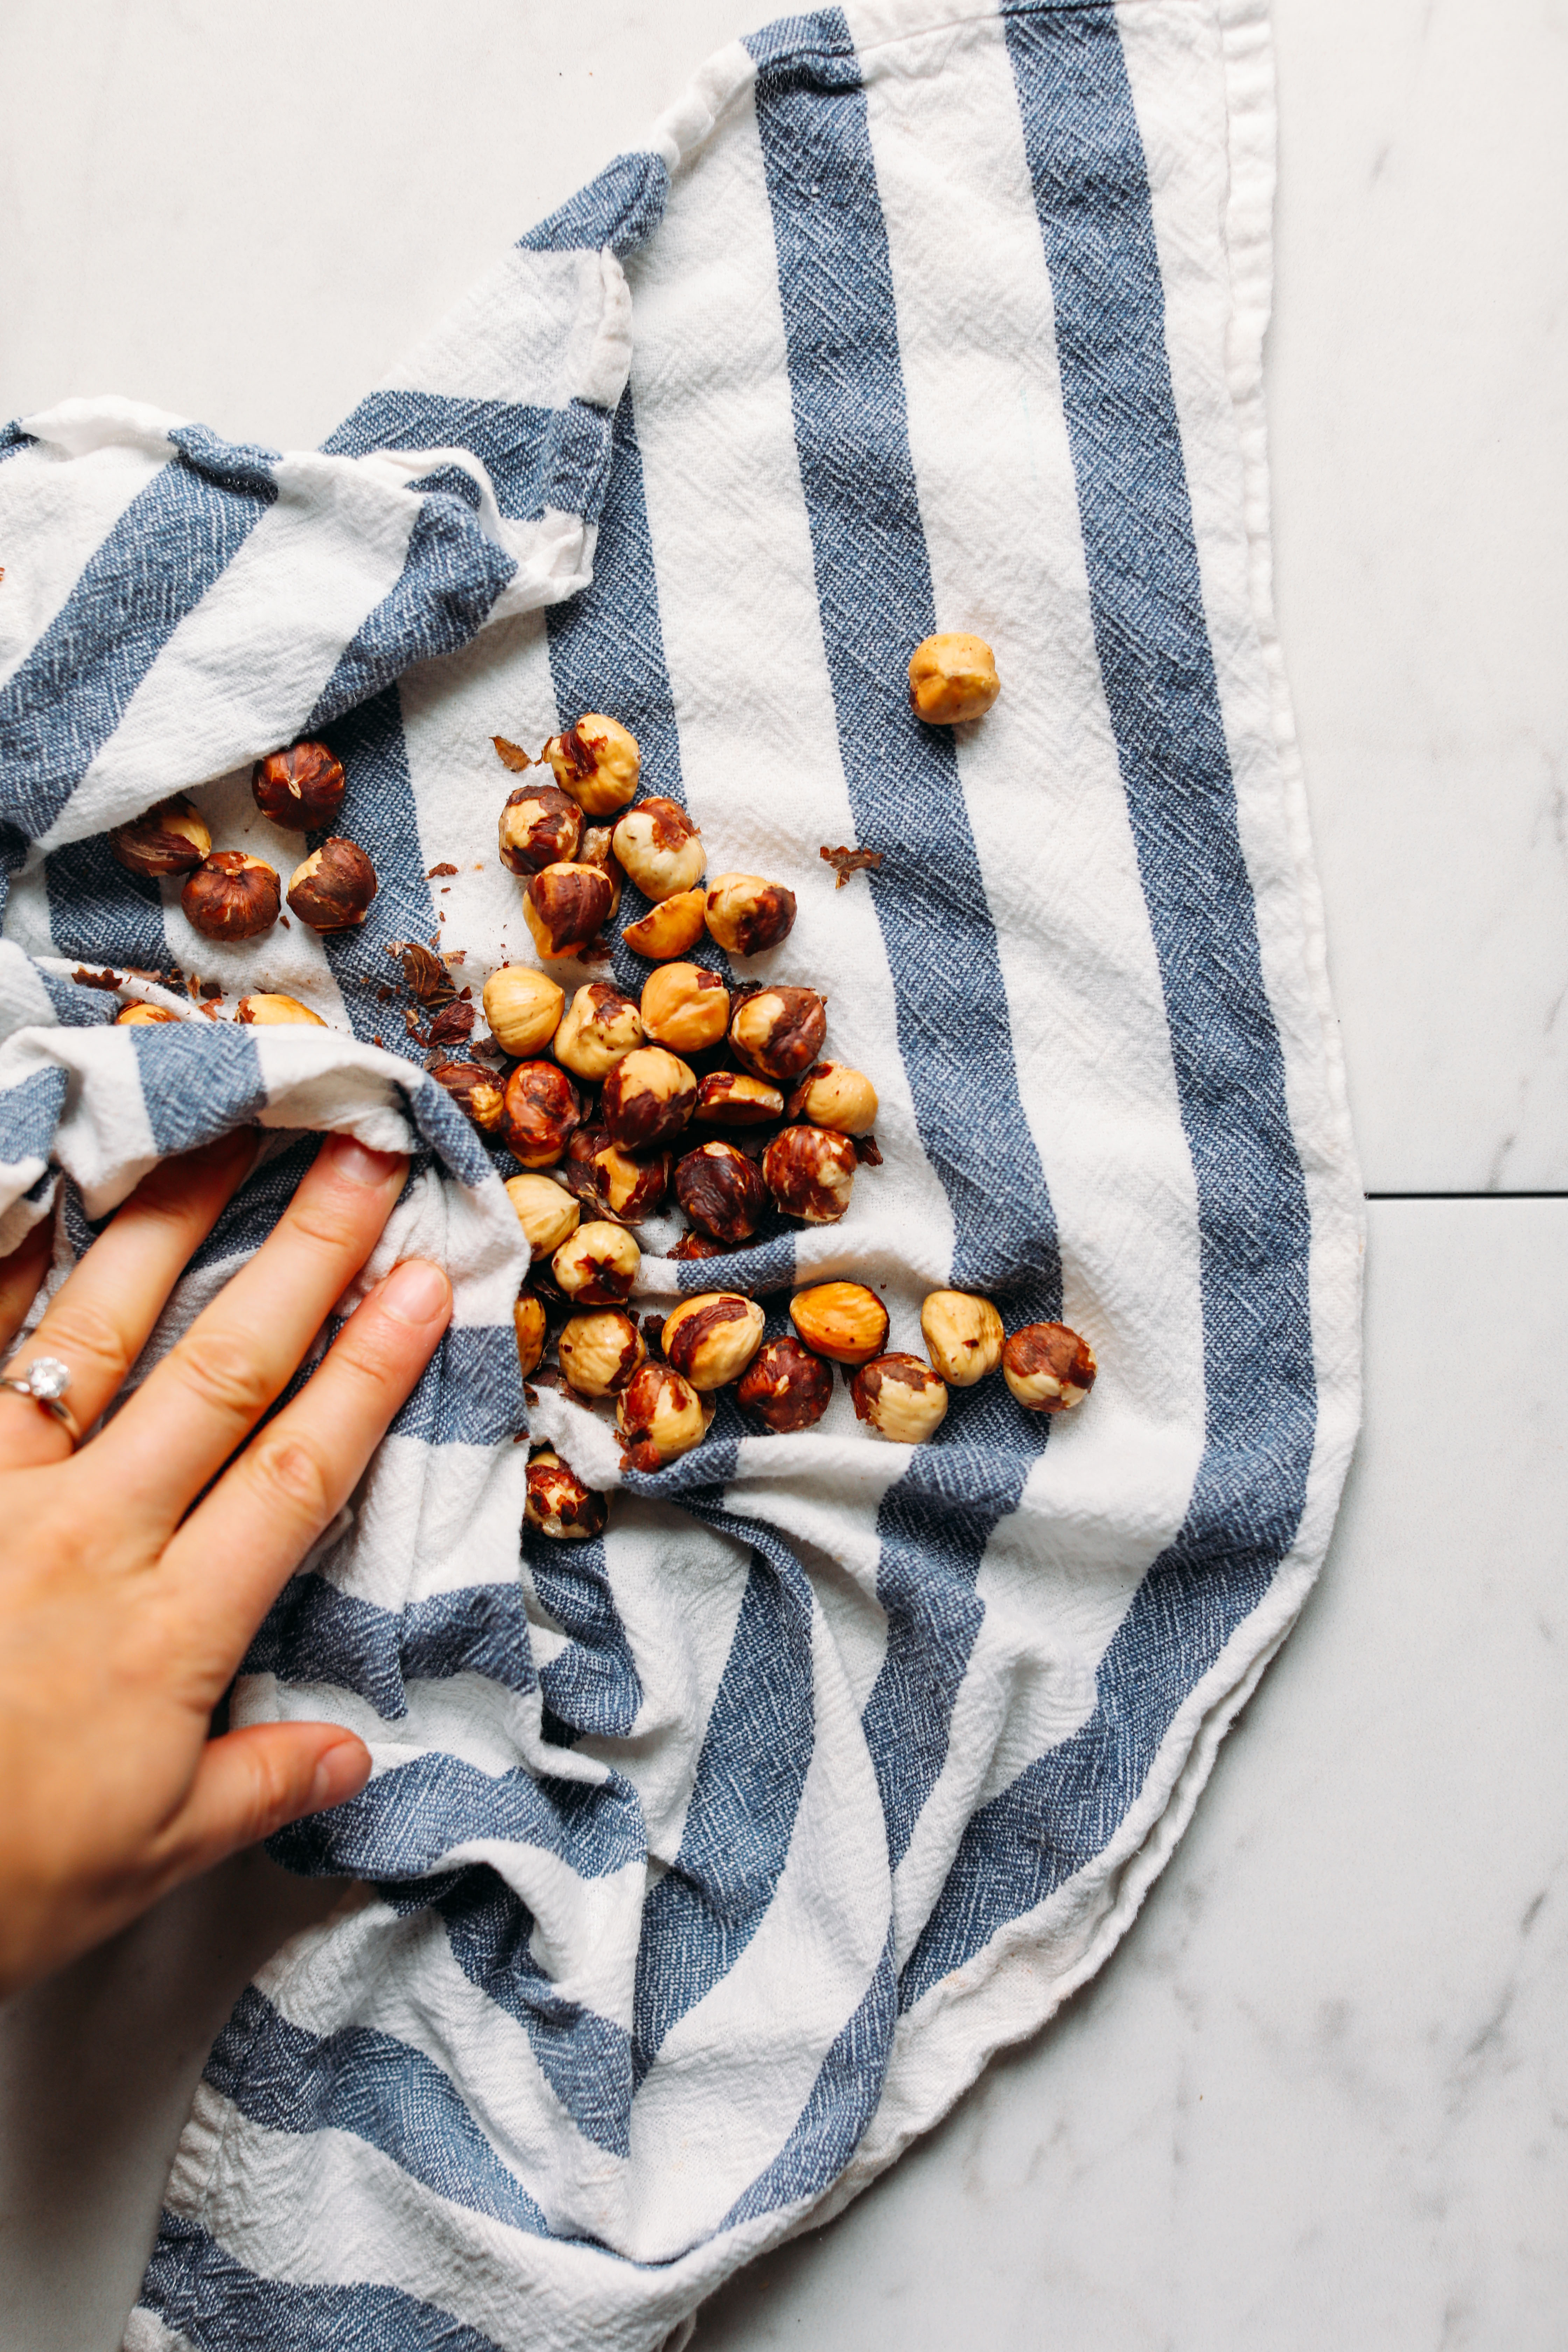 Using a dish towel to remove the skins of roasted hazelnuts